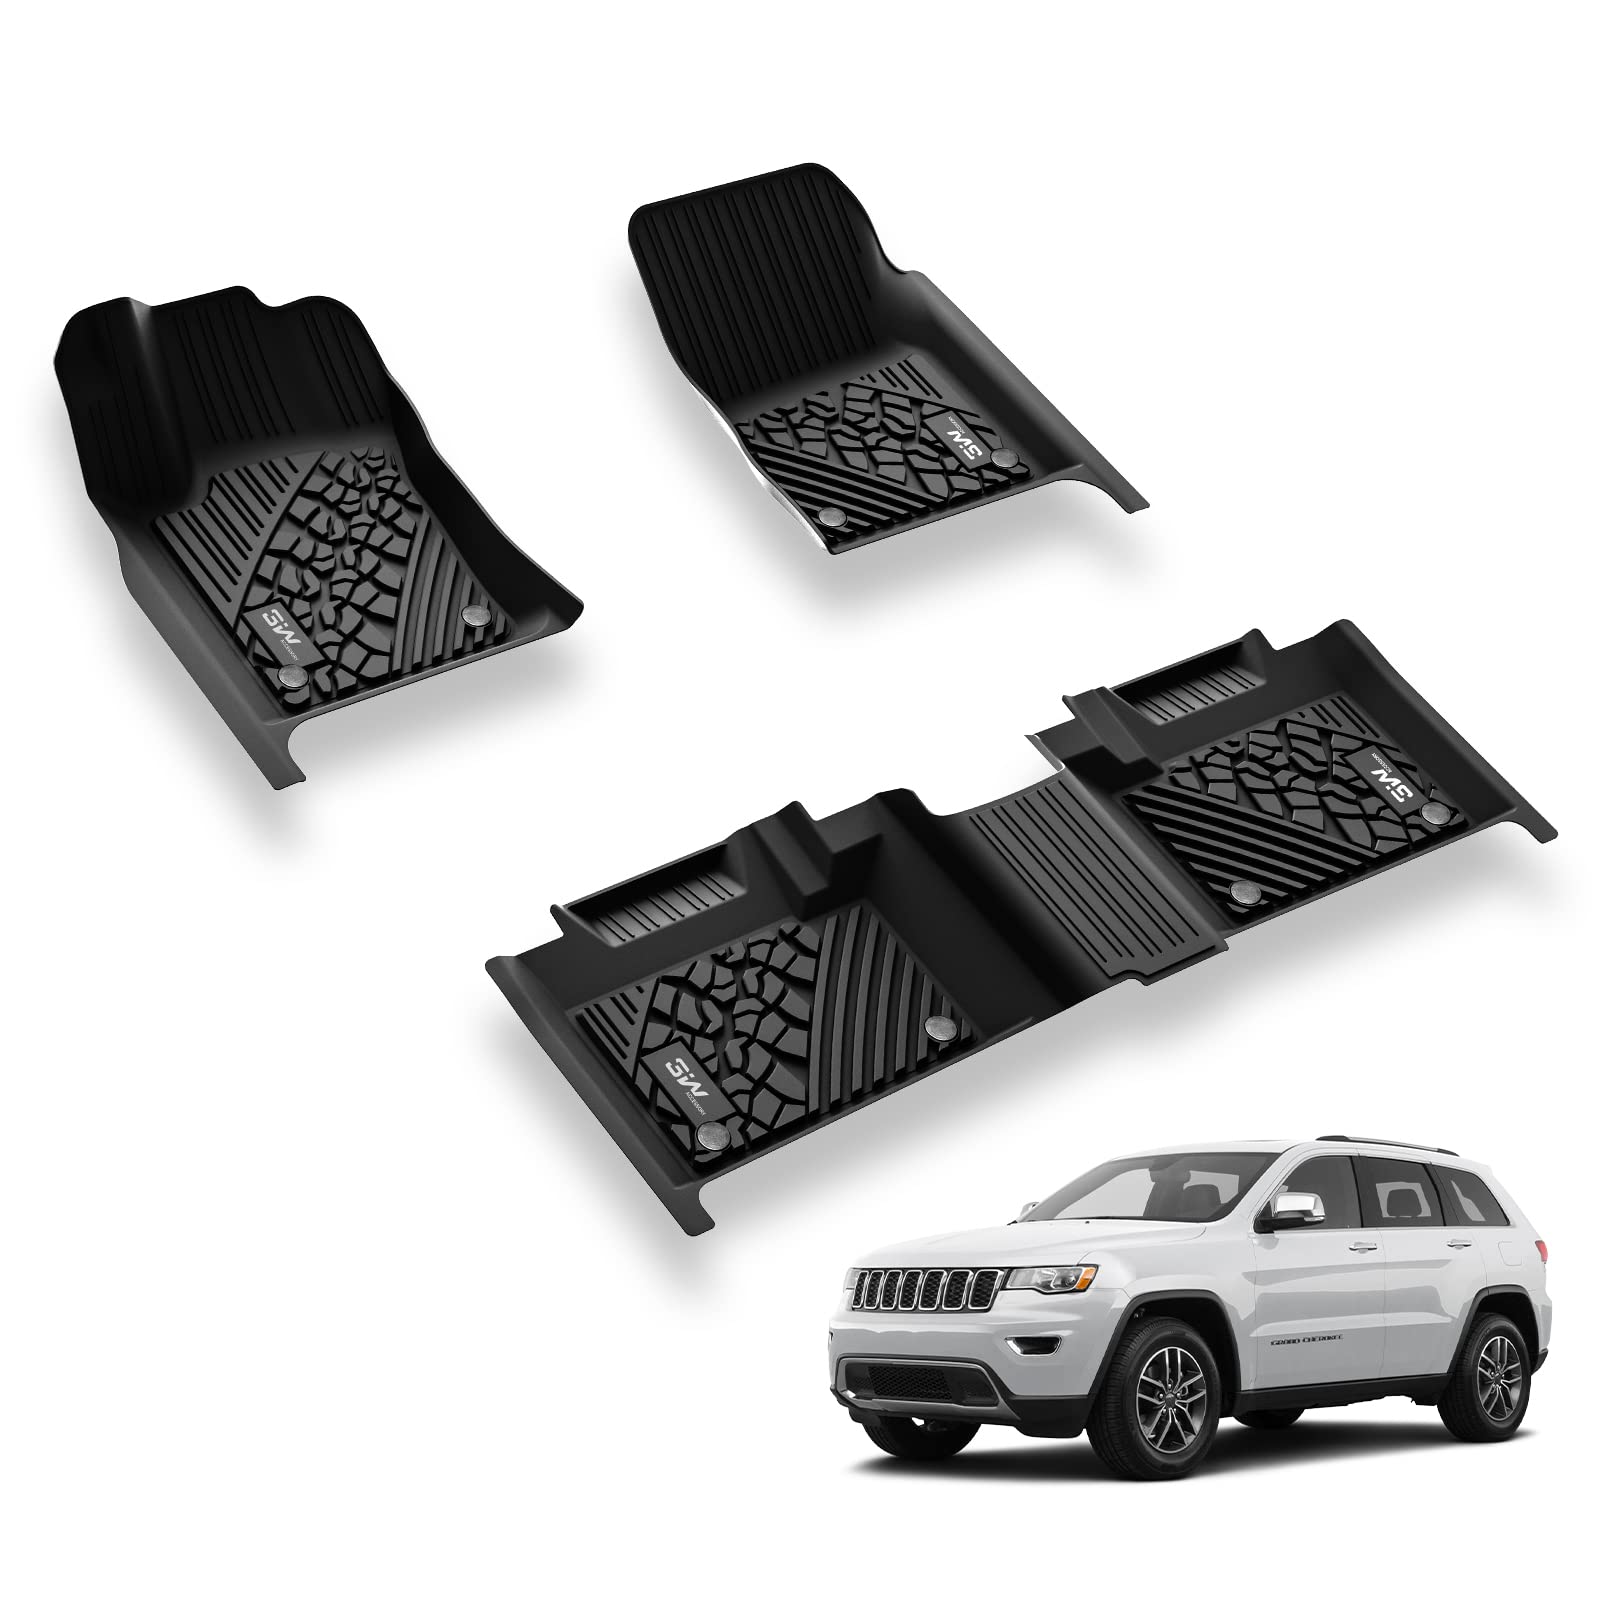 3W Jeep Grand Cherokee 2013-2015 (Non L or WK) Custom Floor Mat Trunk Mat TPE Material & All-Weather Protection Vehicles & Parts 3Wliners 2013-2015 Grand Cherokee 2013-2015 1st&2nd Row Mats